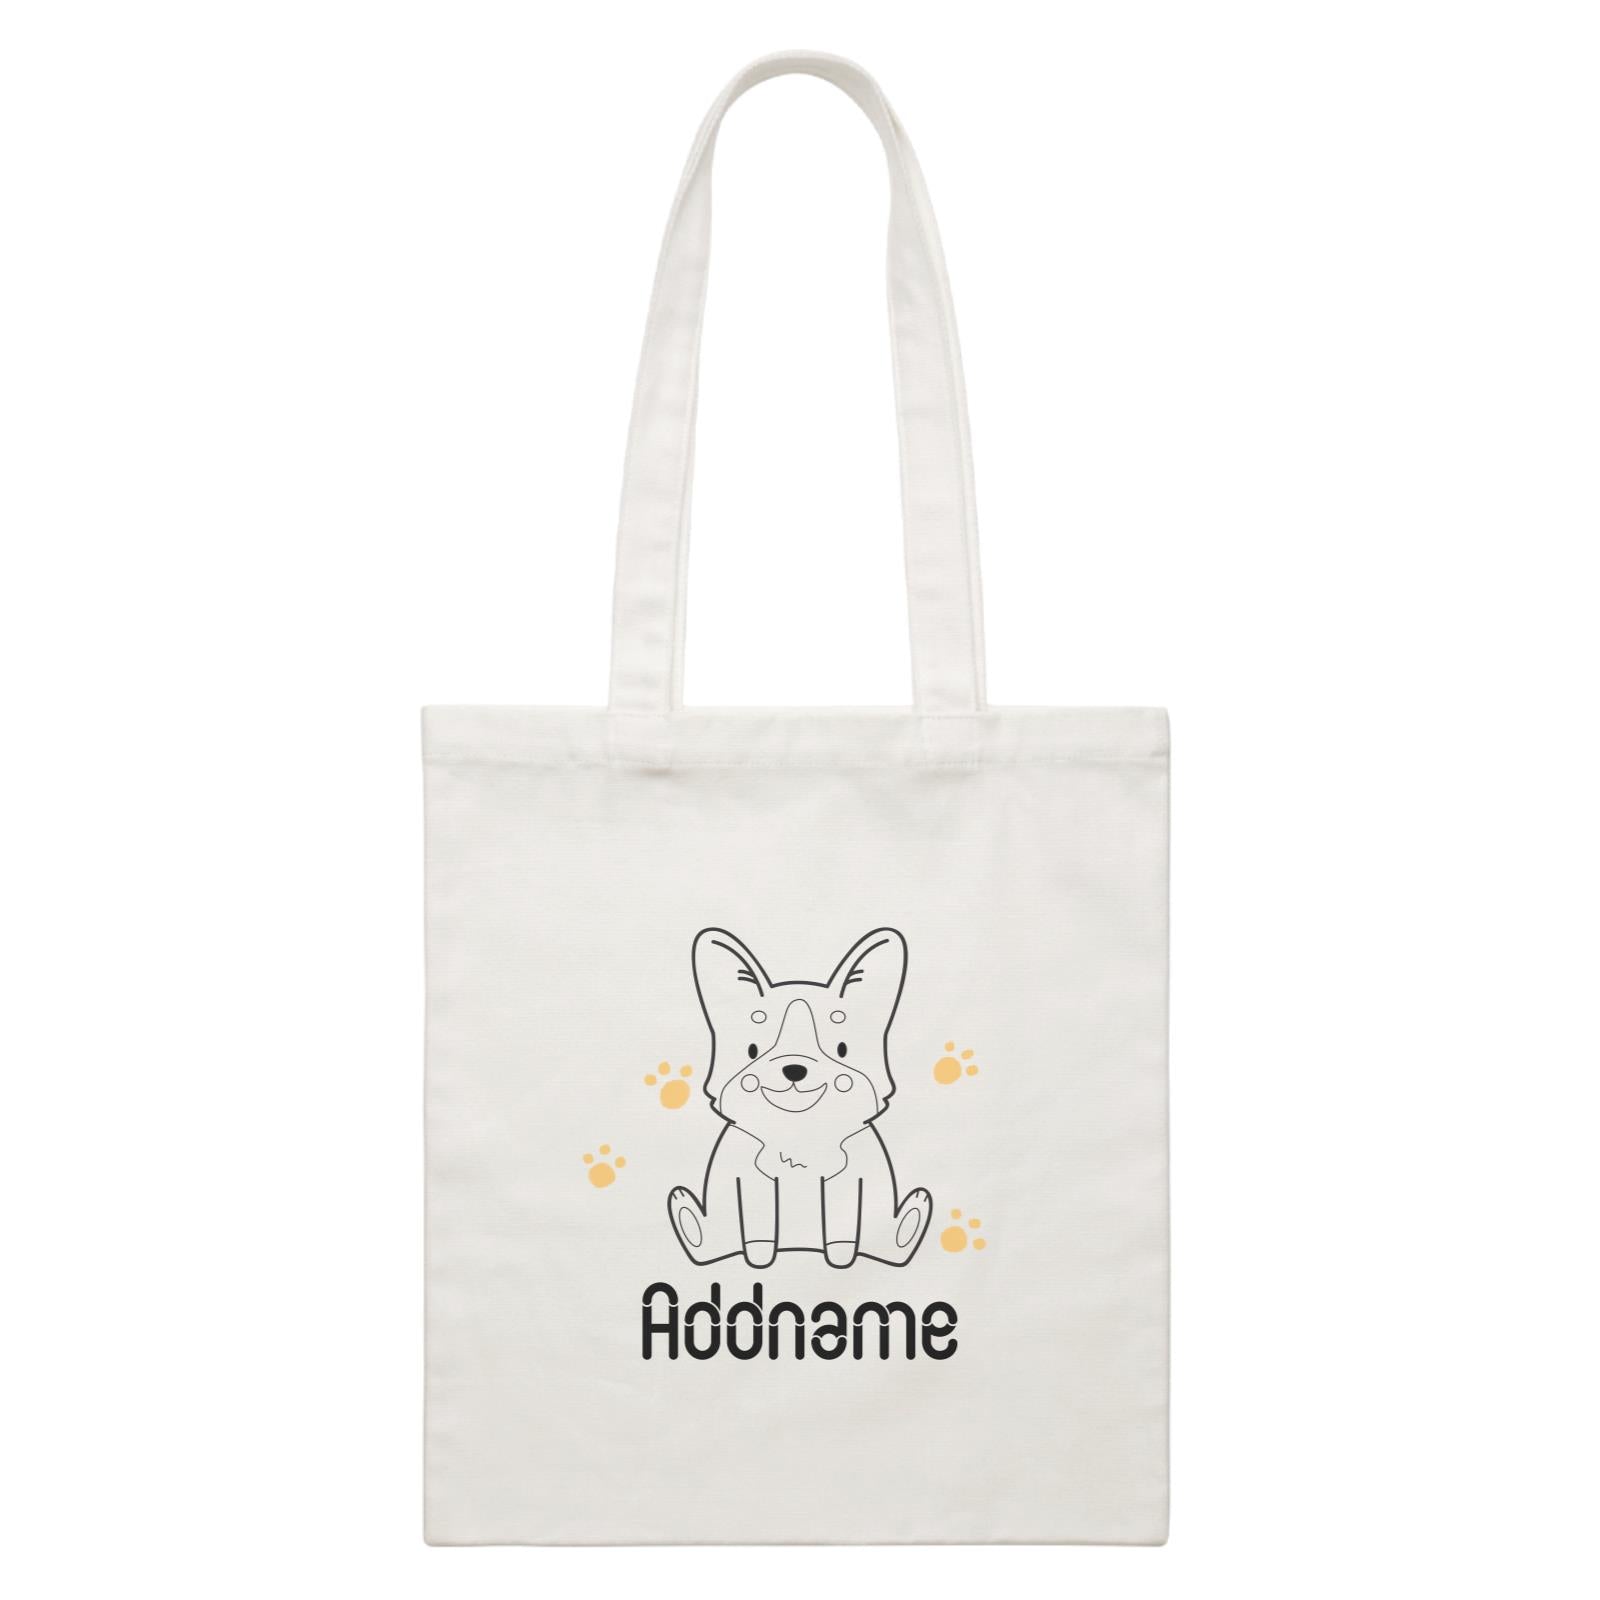 Coloring Outline Cute Hand Drawn Animals Dogs Corgi Addname White White Canvas Bag